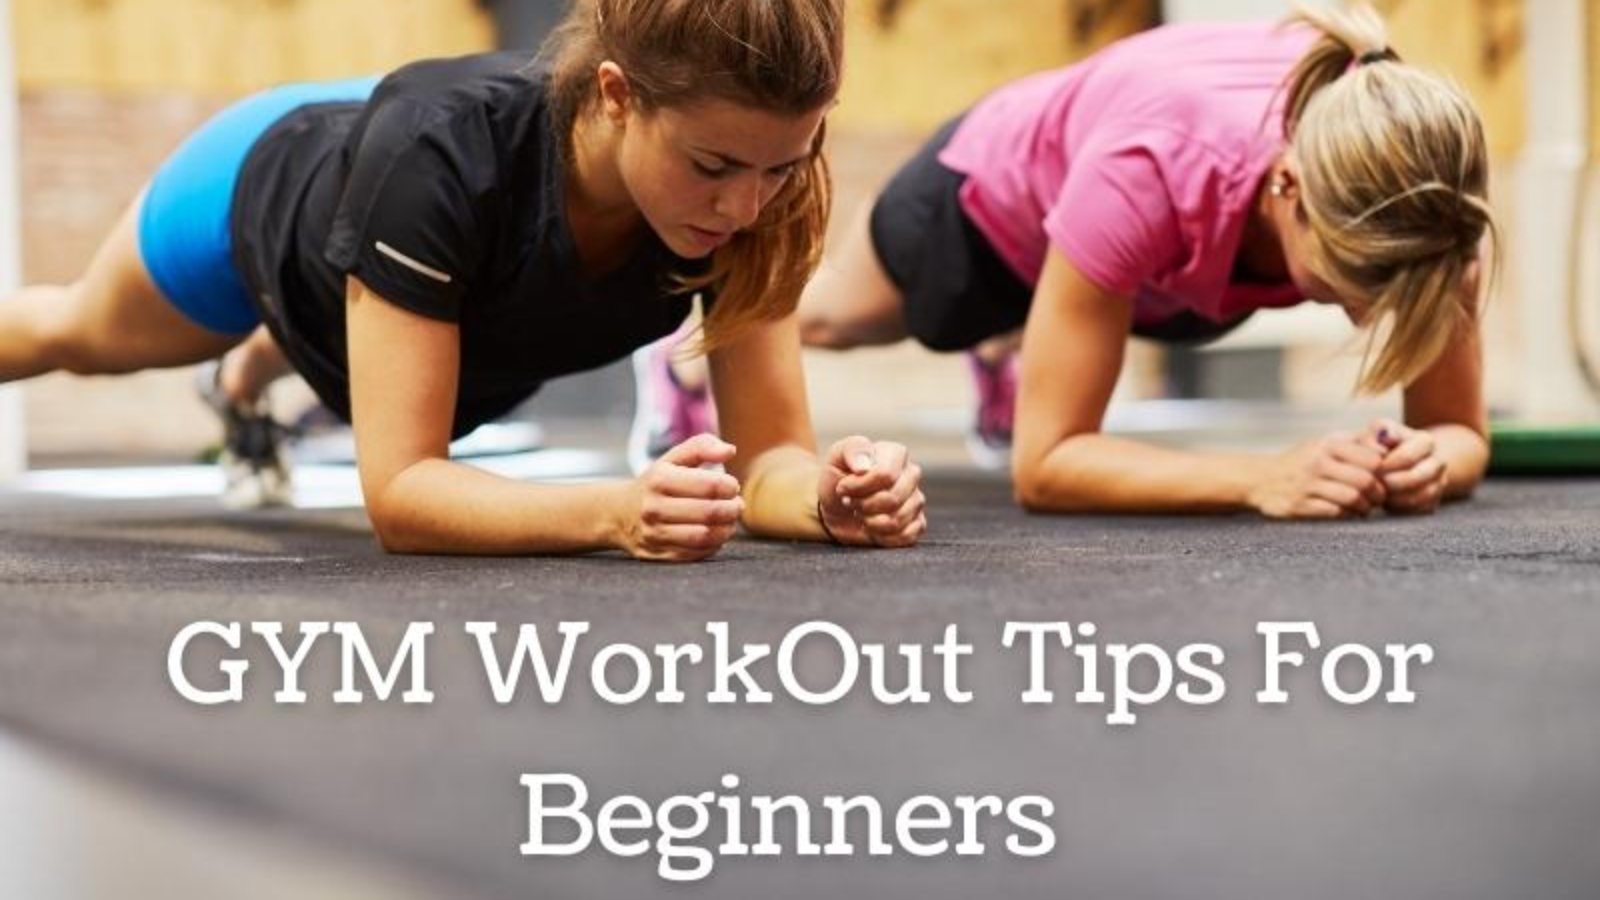 Easy Gym Workout Tips For Beginners